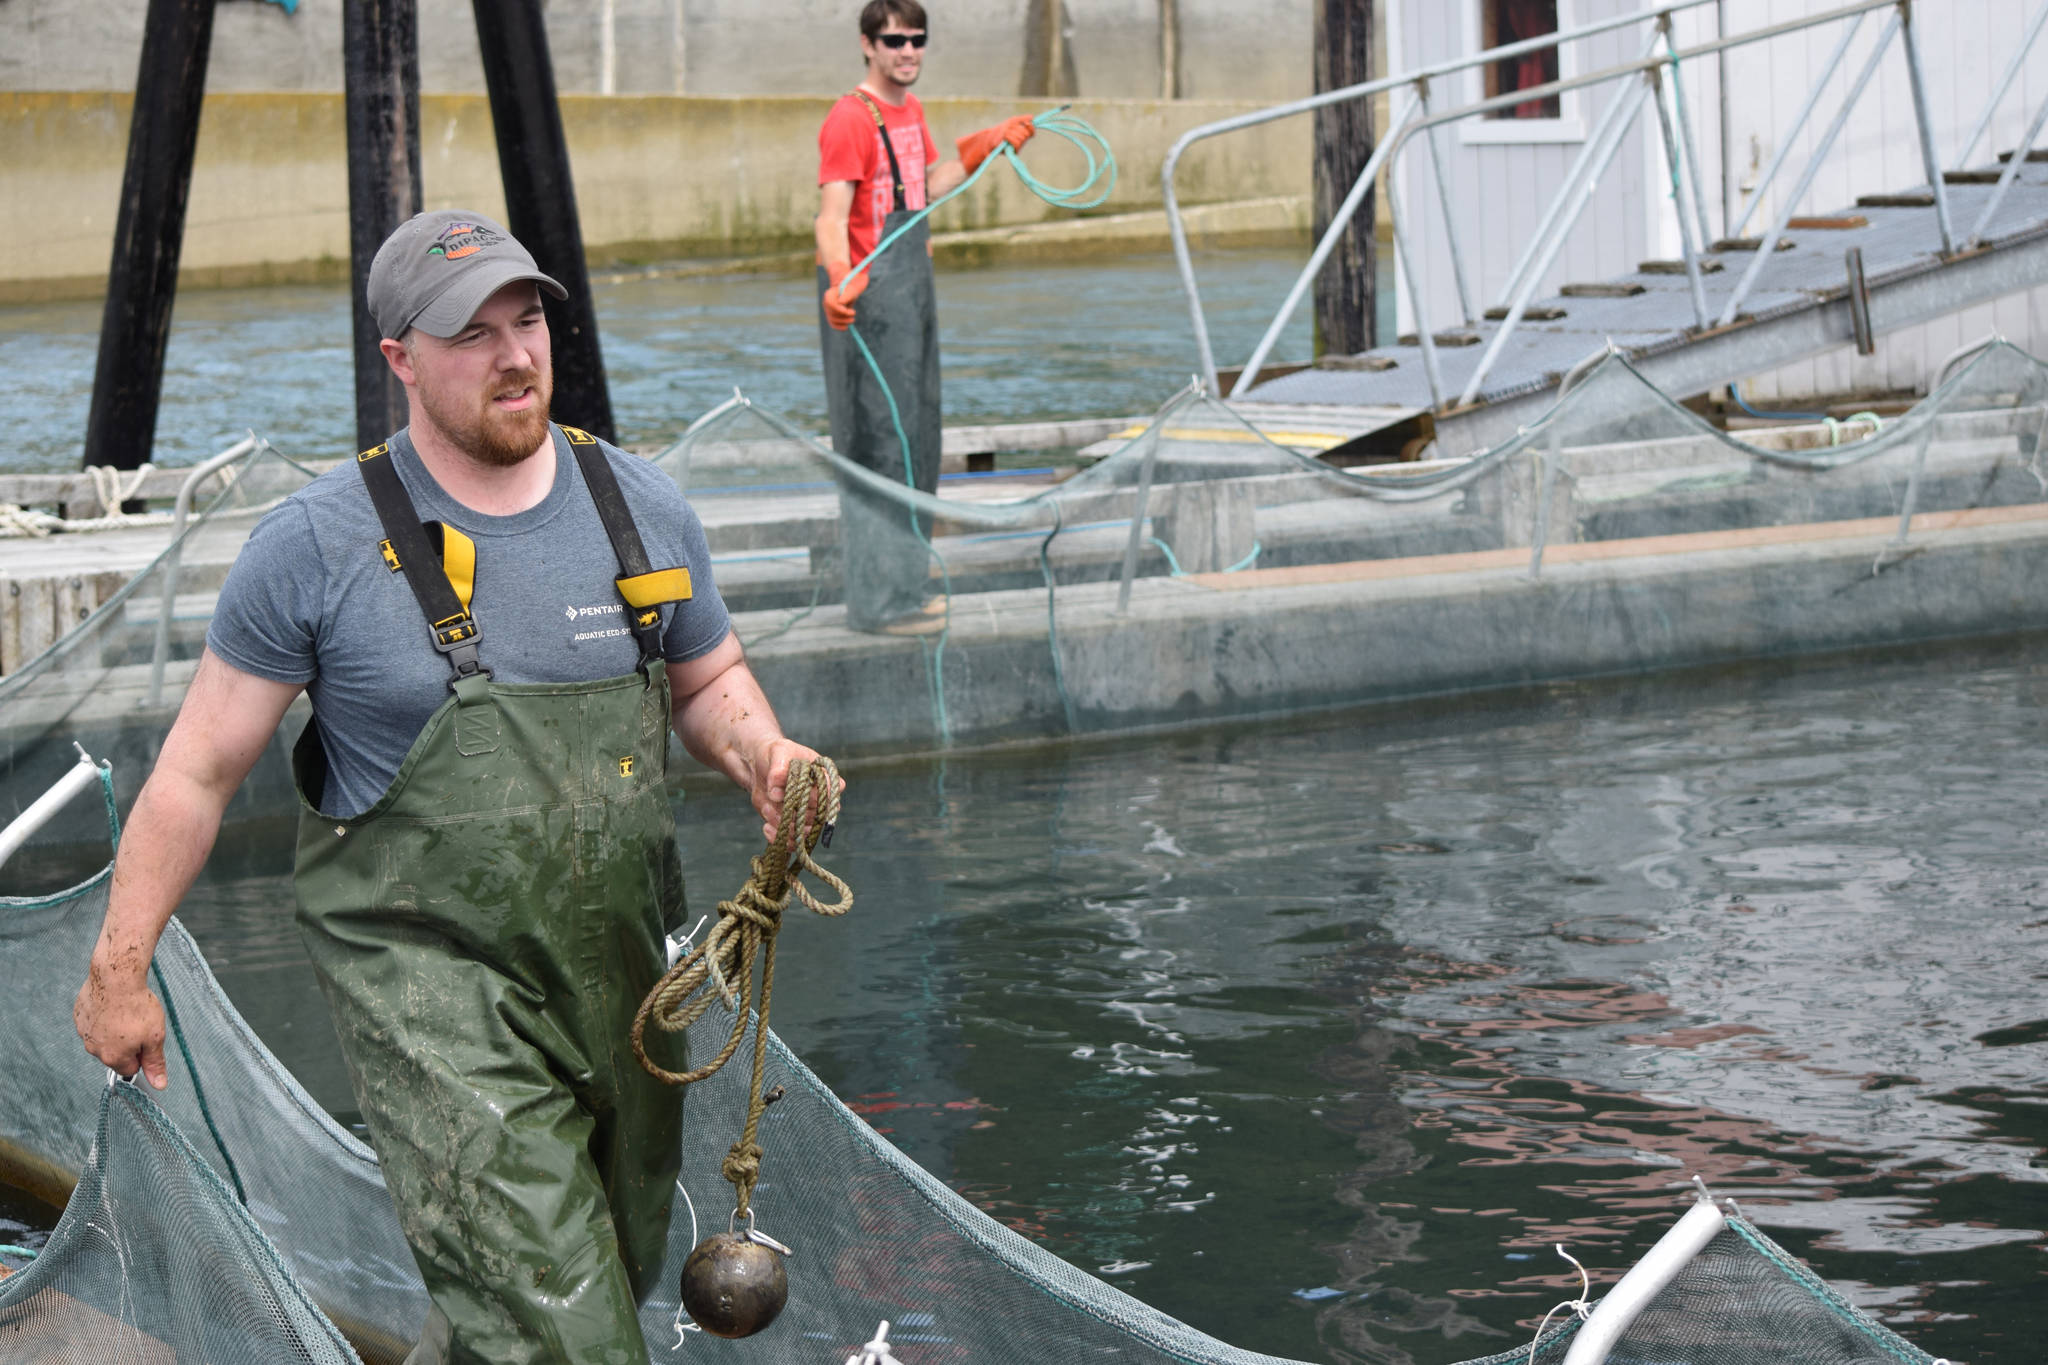 Charlie Currit, foreground, and Elliot Nankervis, background, prepare to release chum salmon from a “net pen” at DIPAC hatchery on Wednesday. (Kevin Gullufsen | Juneau Empire)